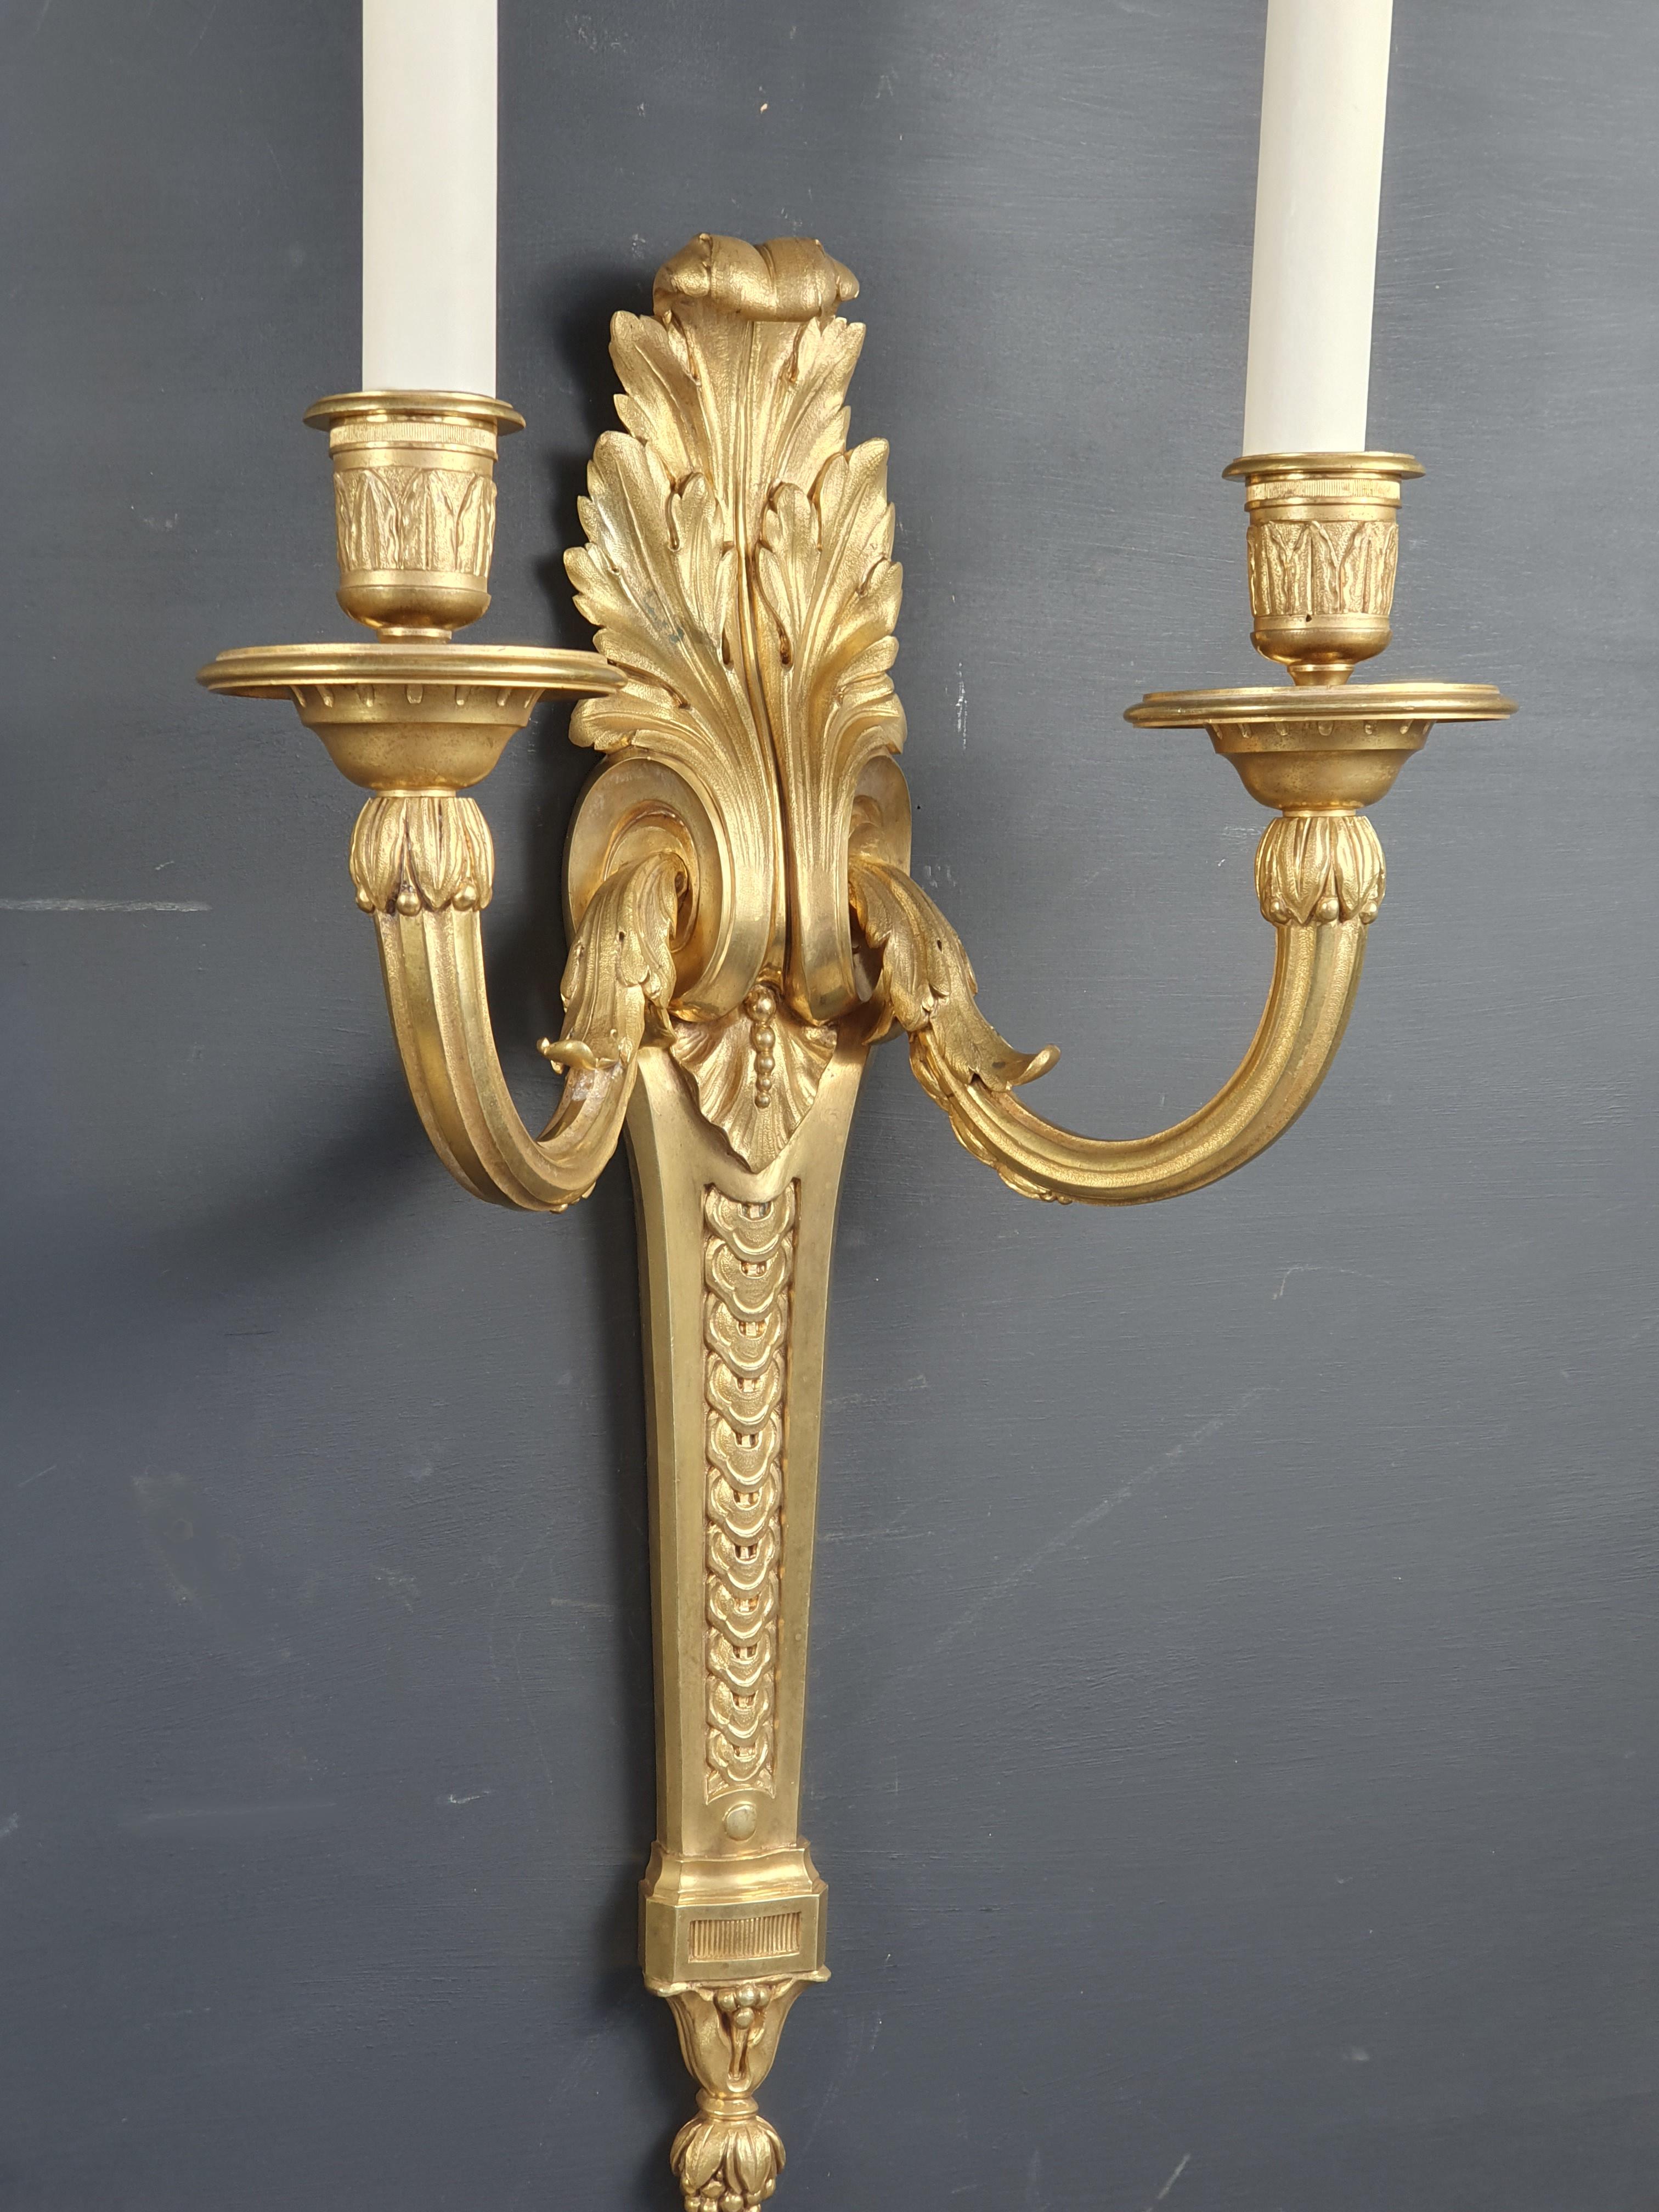 Large pair of Transition style sconces in finely chiseled gilt bronze decorated with scrolls of acanthus leaves, interlacing frieze and plant ornaments.

Beautiful original gilding in very good condition.

Parisian work from the end of the 19th